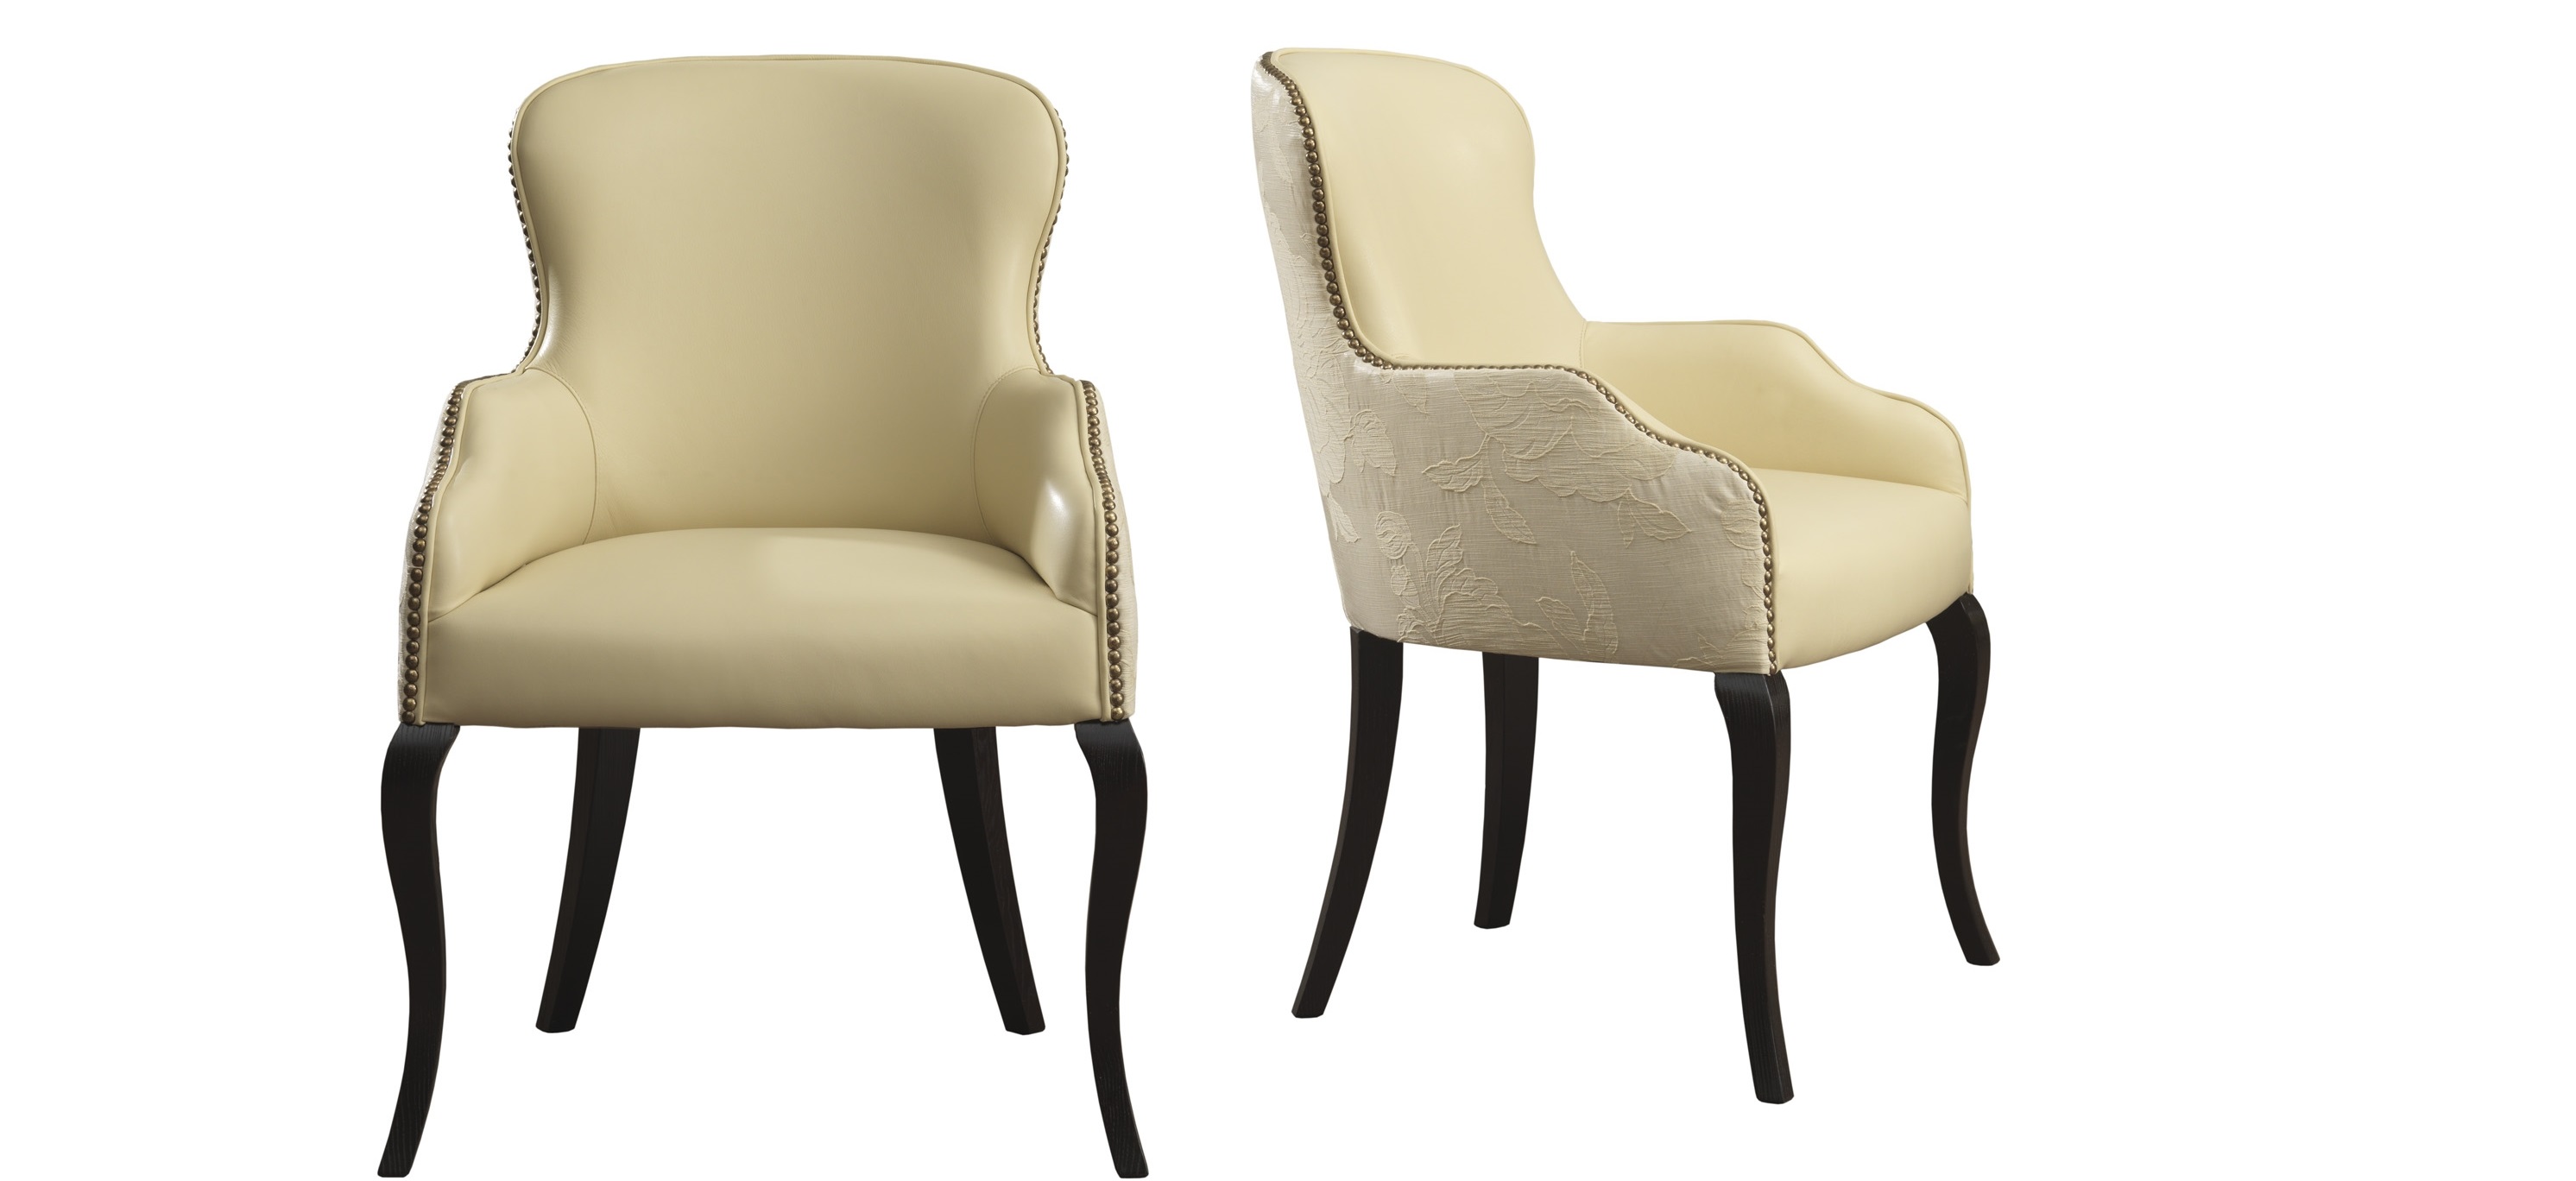 Small armchairs ... modern style small armchairs with carmen chairs and small armchairs  galimberti JUAYXDI